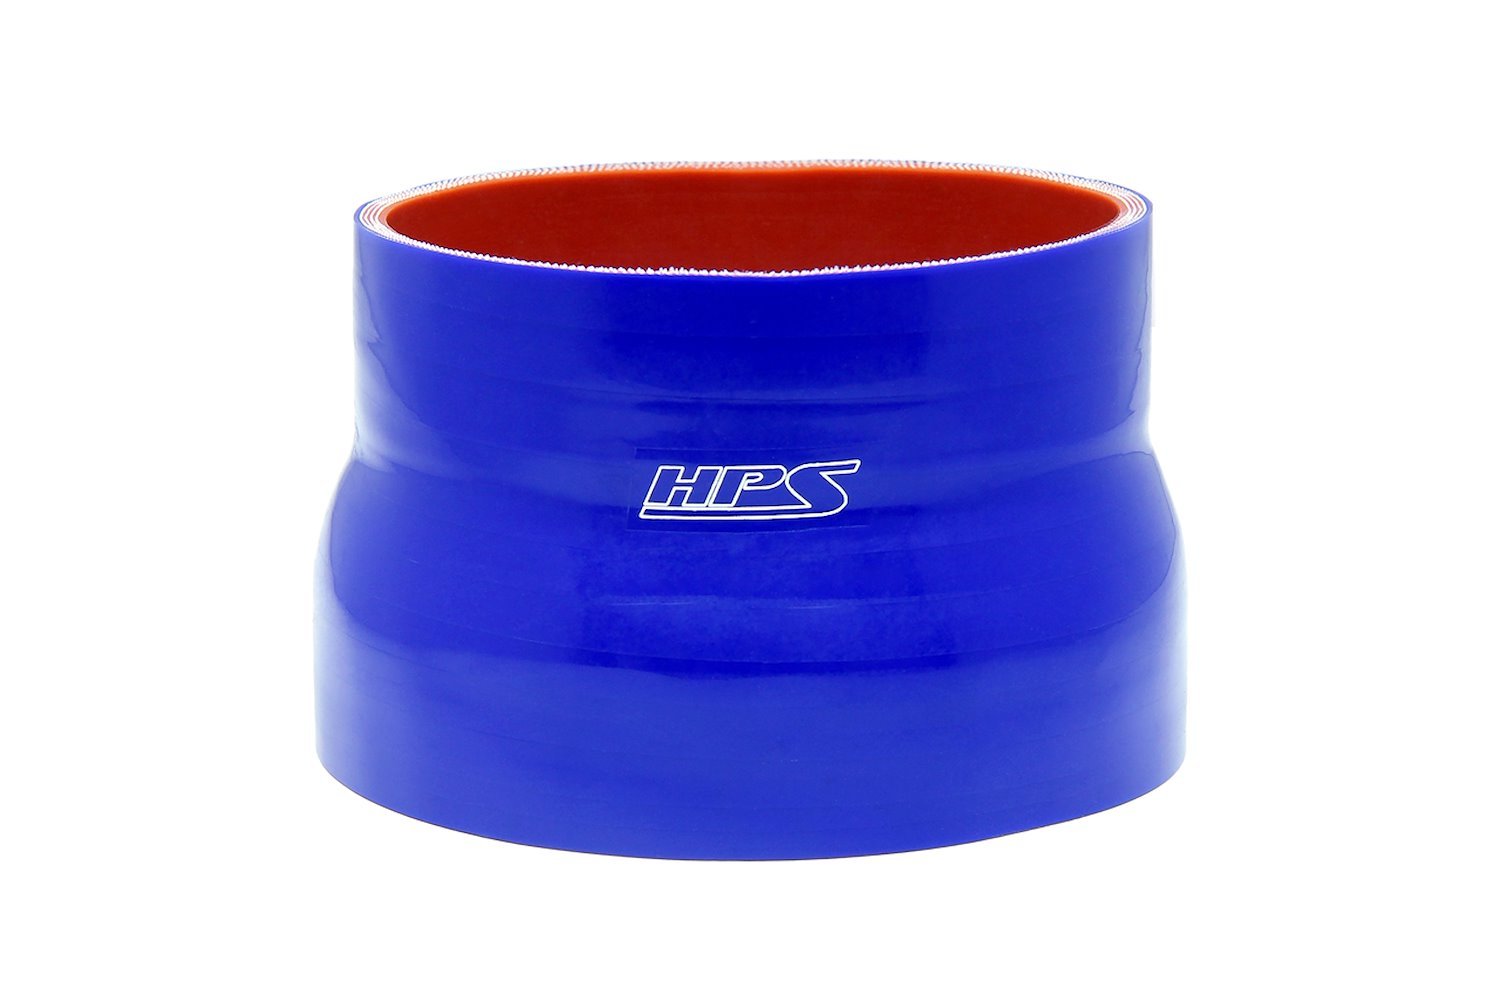 HTSR-400-425-L5-BLUE Silicone Reducer Hose, High-Temp 4-Ply Reinforced, 4 in. - 4-1/4 in. ID, 5 in. Long, Blue